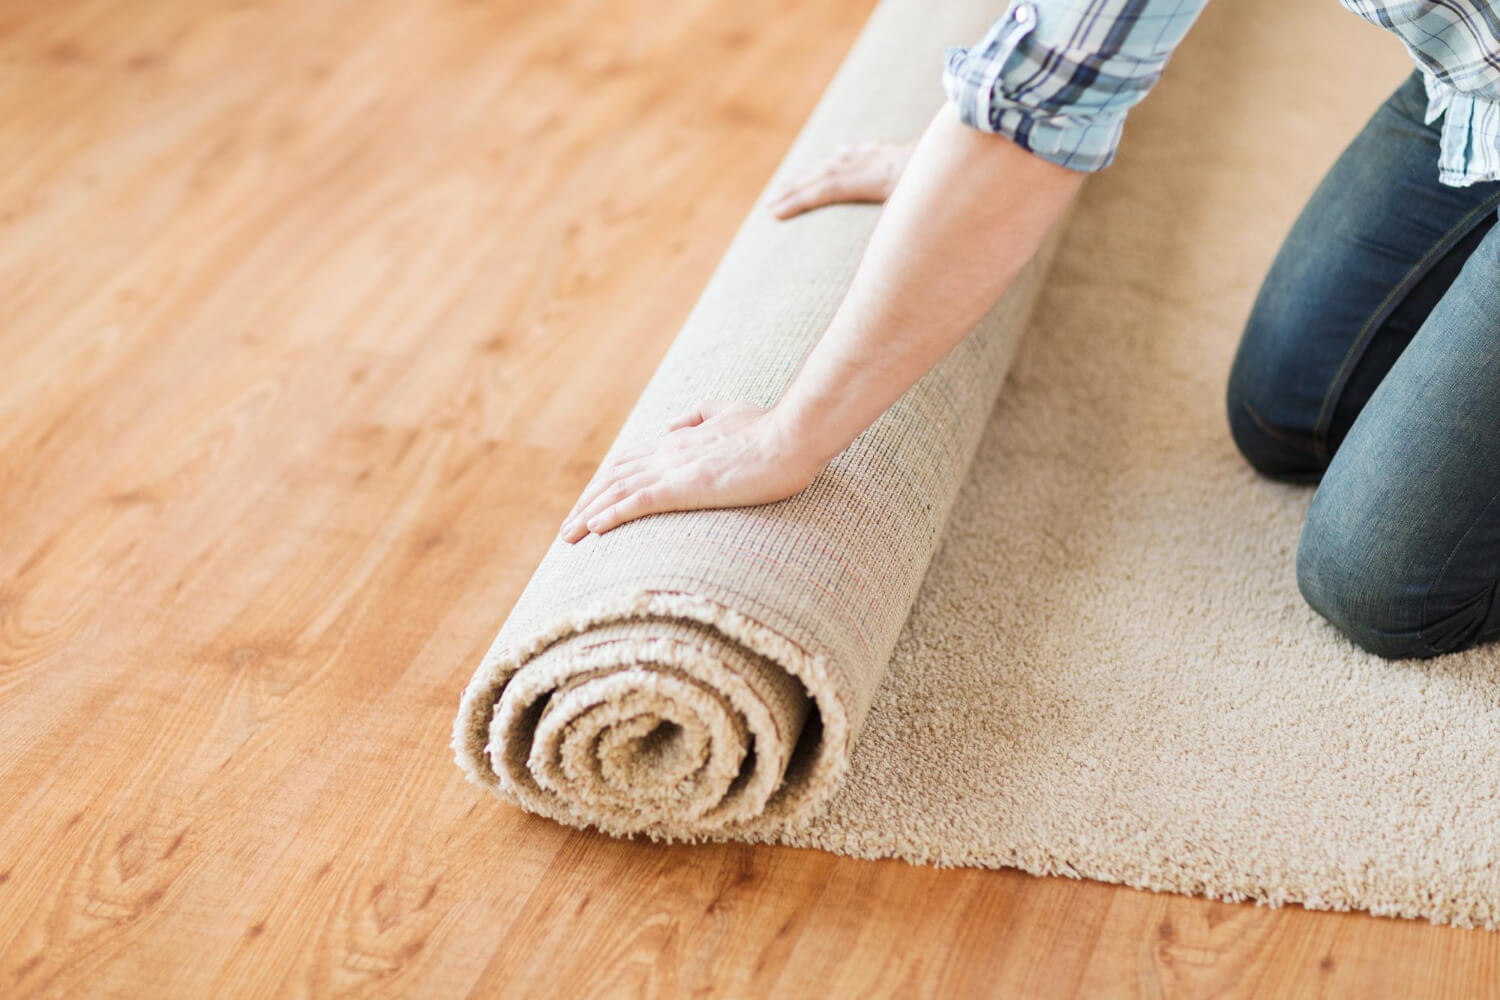 5 Tips For Repairing Carpet In A Timely Manner